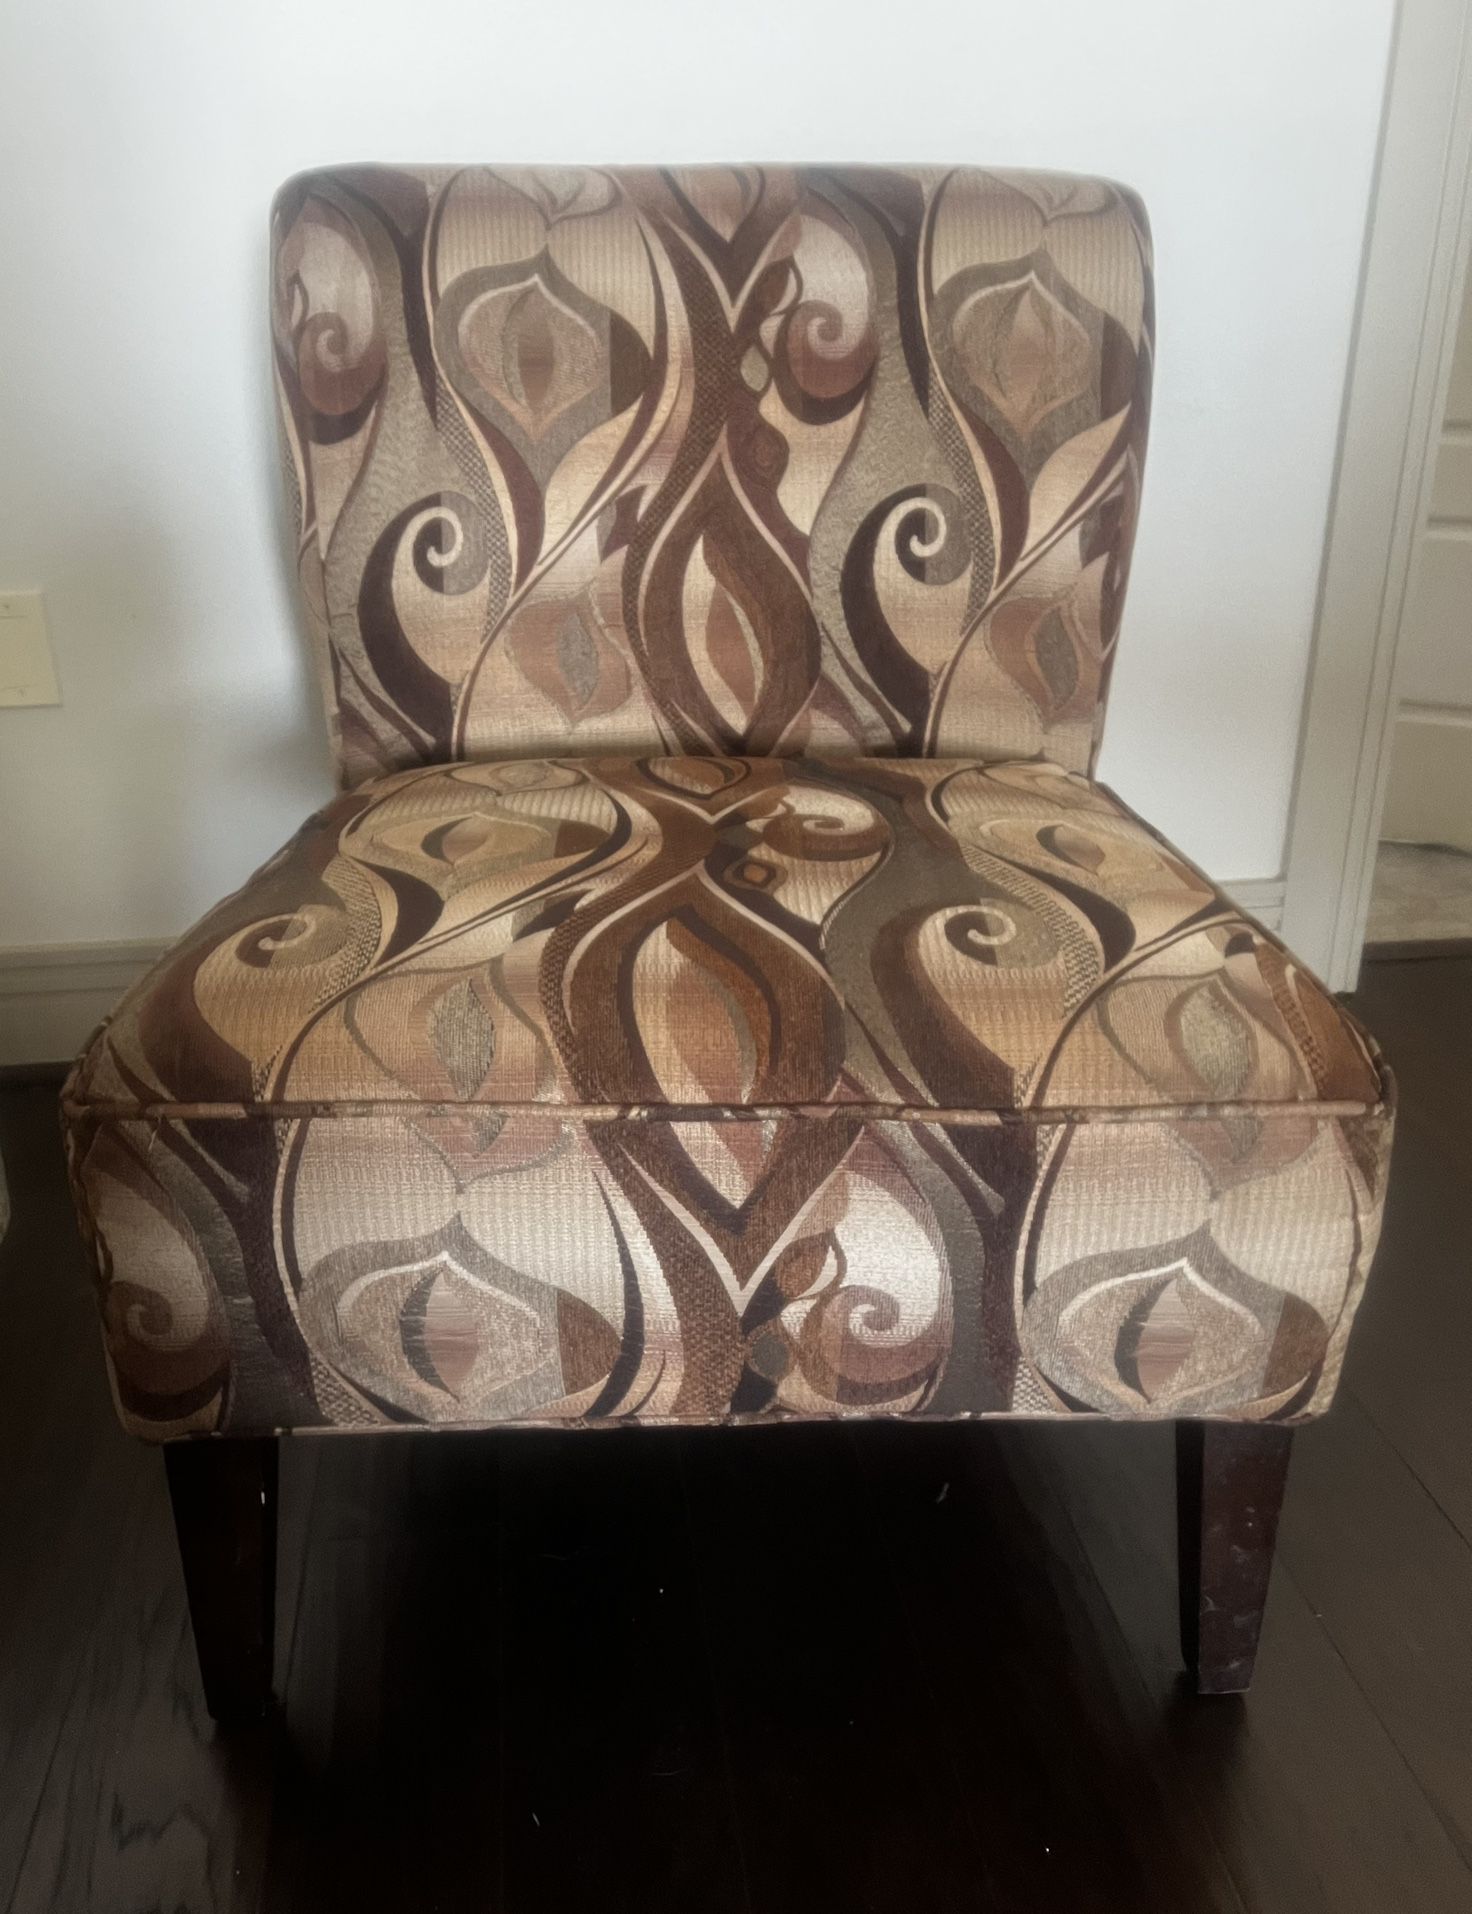 Decorative Contemporary Chair - like new